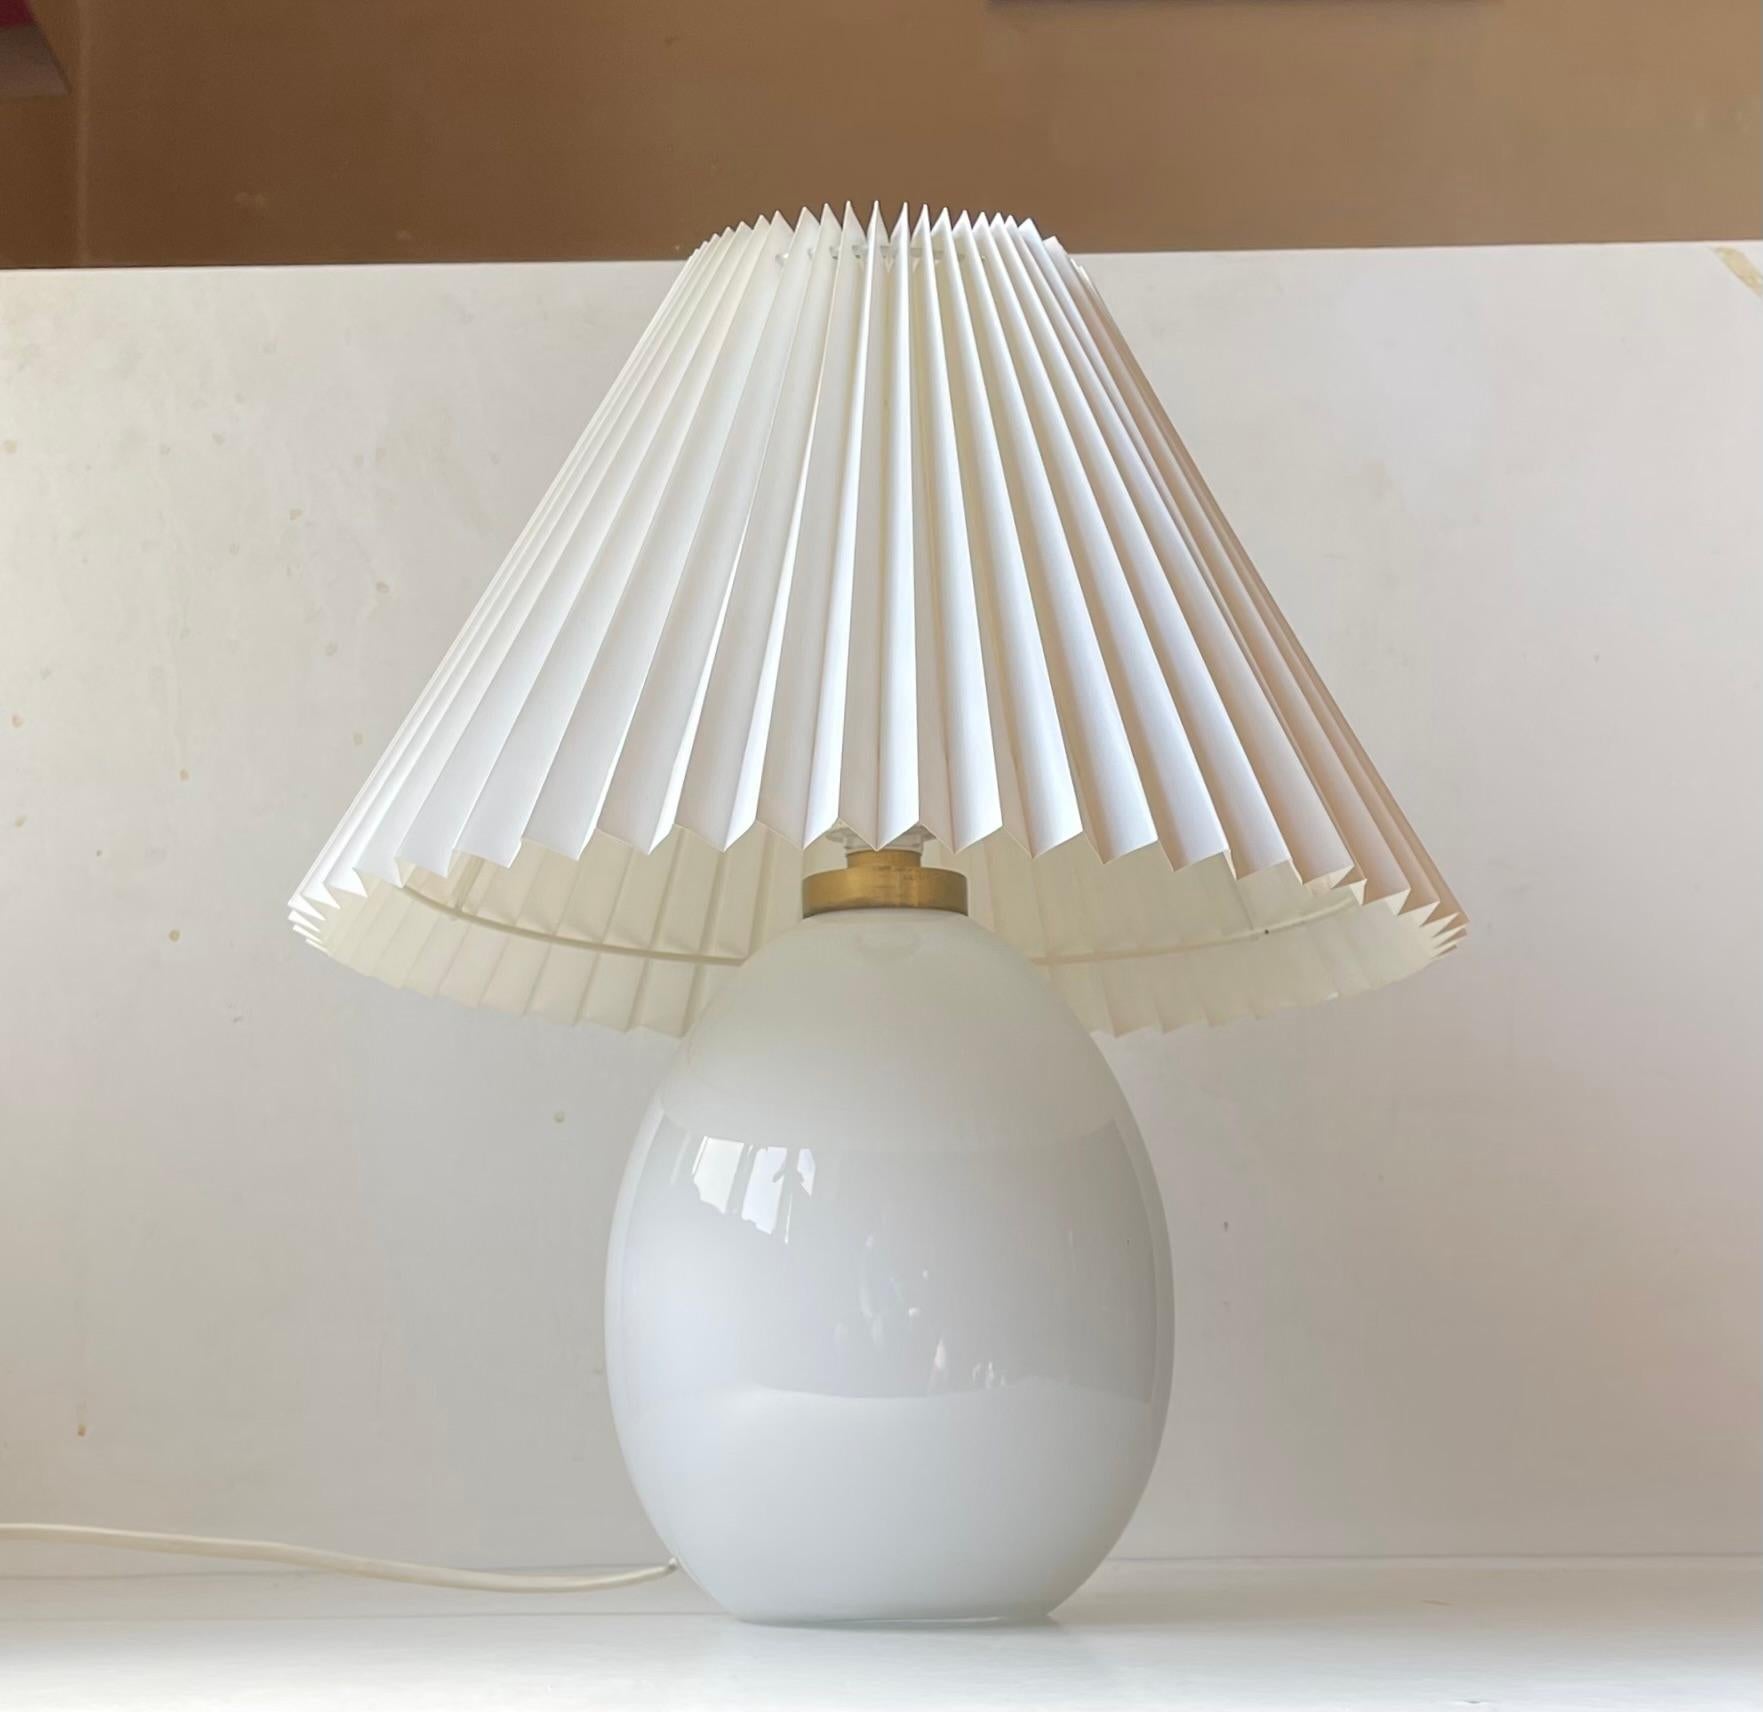 Egg shaped white opaline glass table lamp designed by Poul Seest Andersen and manufactured by Le Klint and Holmegaard in Denmark during the late 1970s or early 80s. It features a pin-on/of switch, a brass top and makers marks to the base. It comes